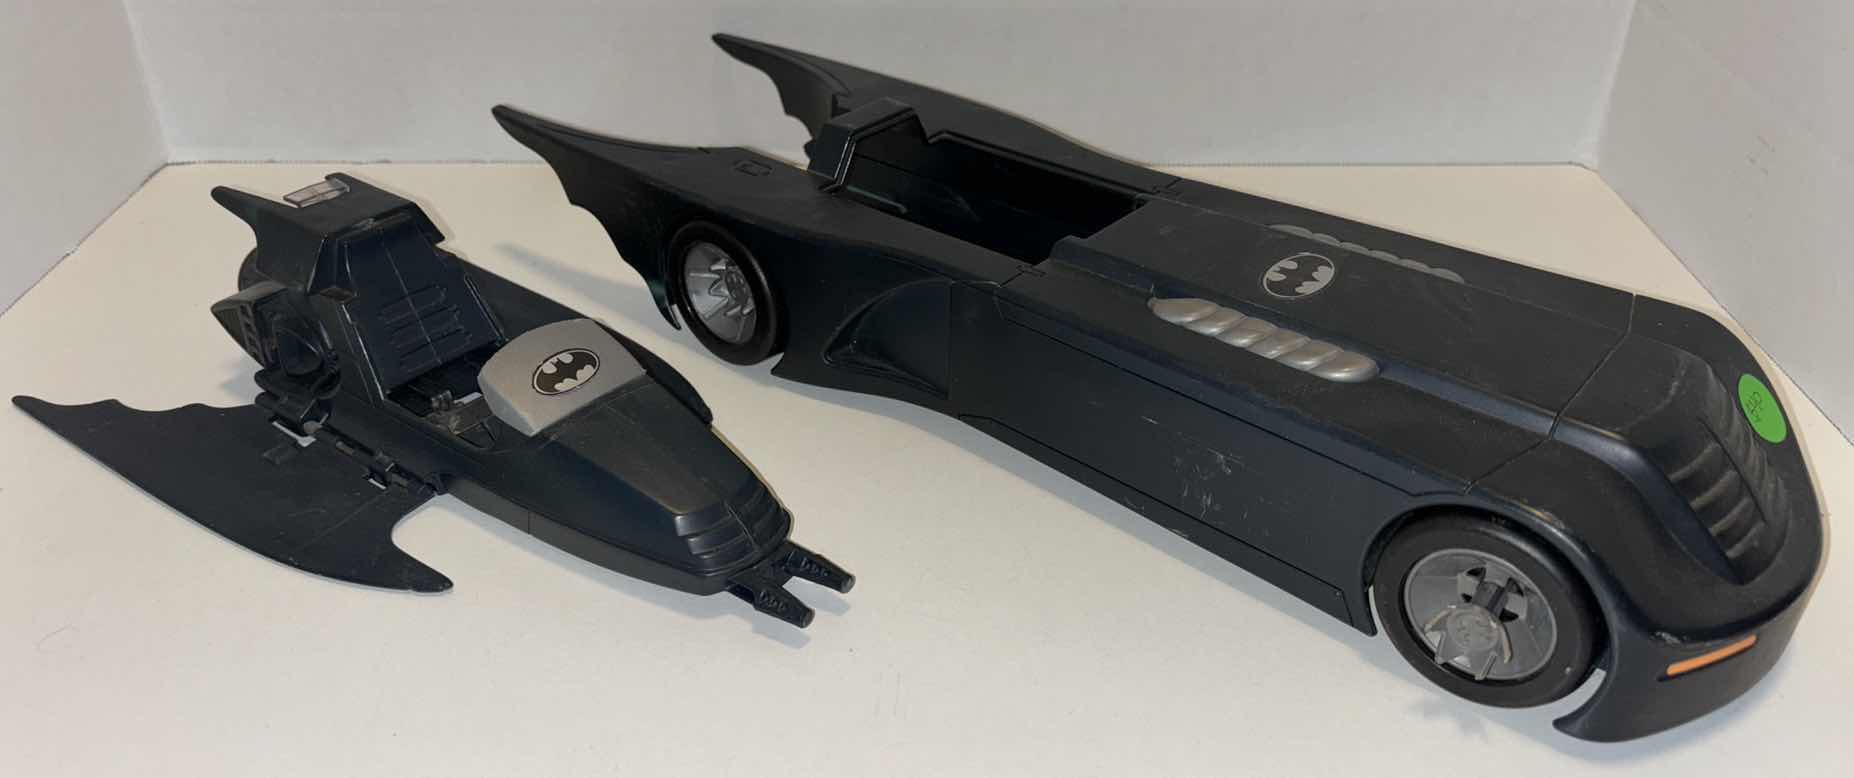 Photo 5 of ASSORTED VERSIONS OF BATMOBILE VEHICLES (3)